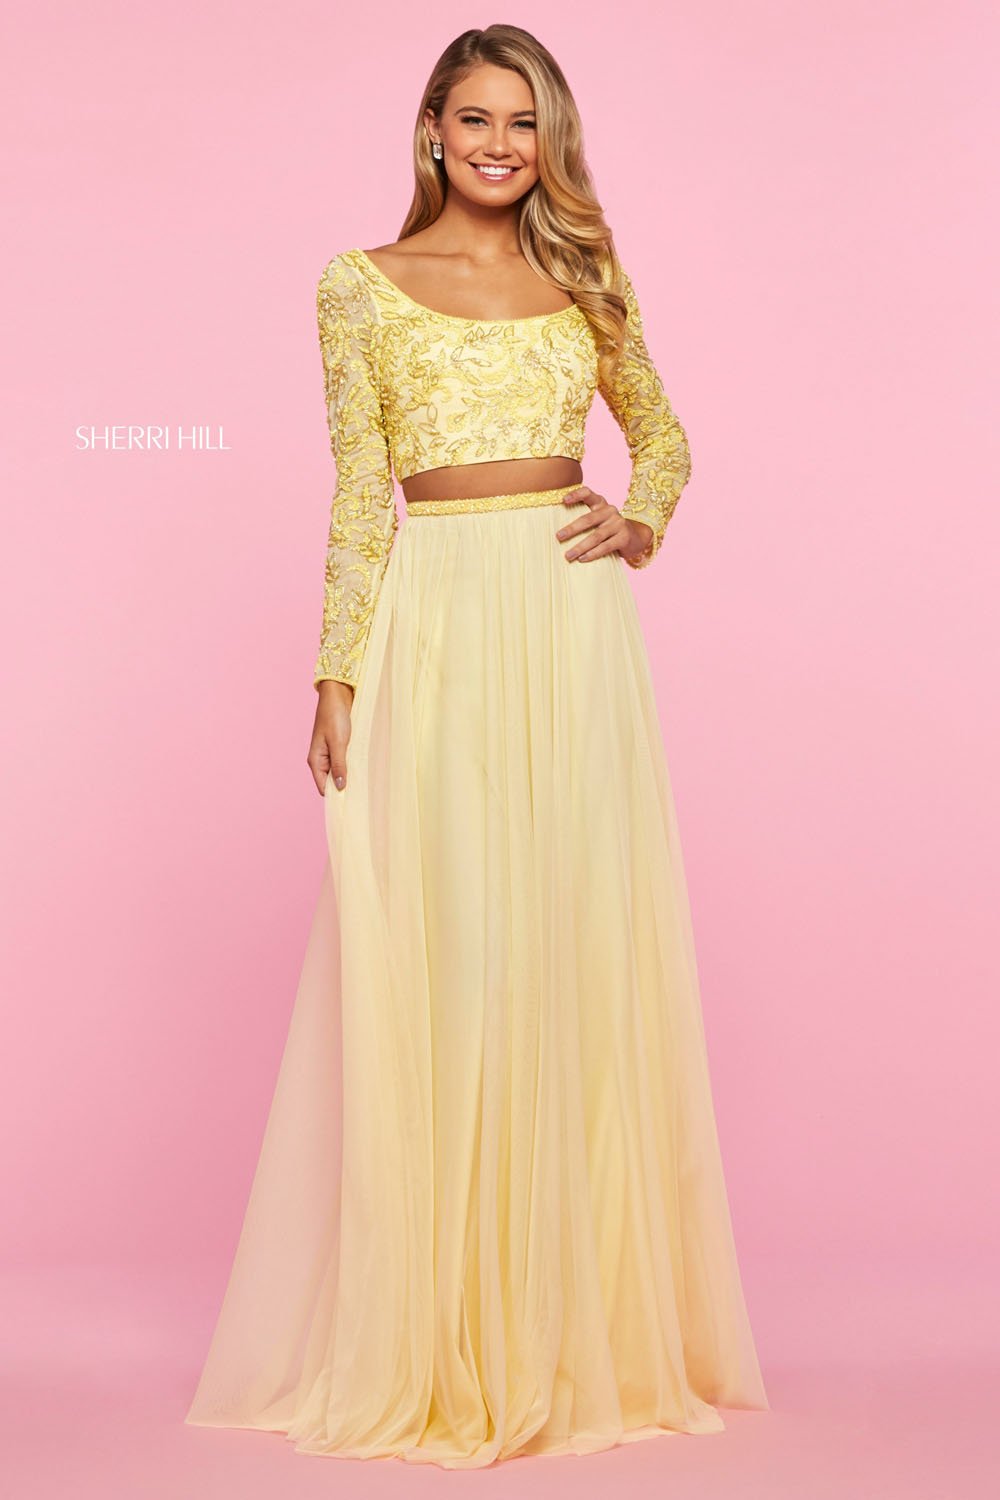 Sherri Hill 53559 dress images in these colors: Nude Ivory, Light Blue, Yellow, Blush.